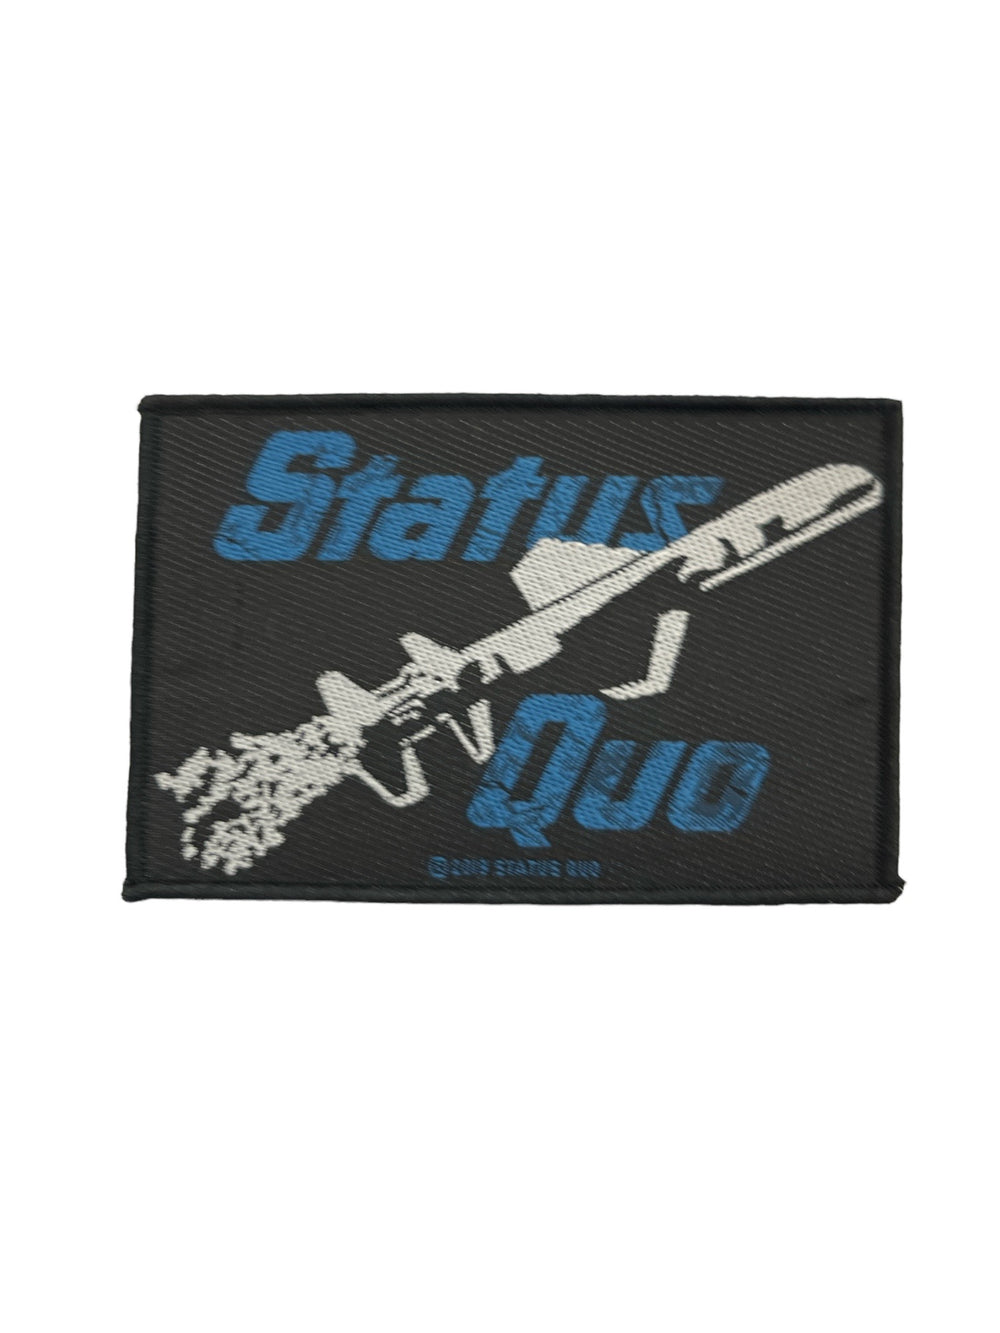 Status Quo Just Supposin' Official Woven Patch Brand New